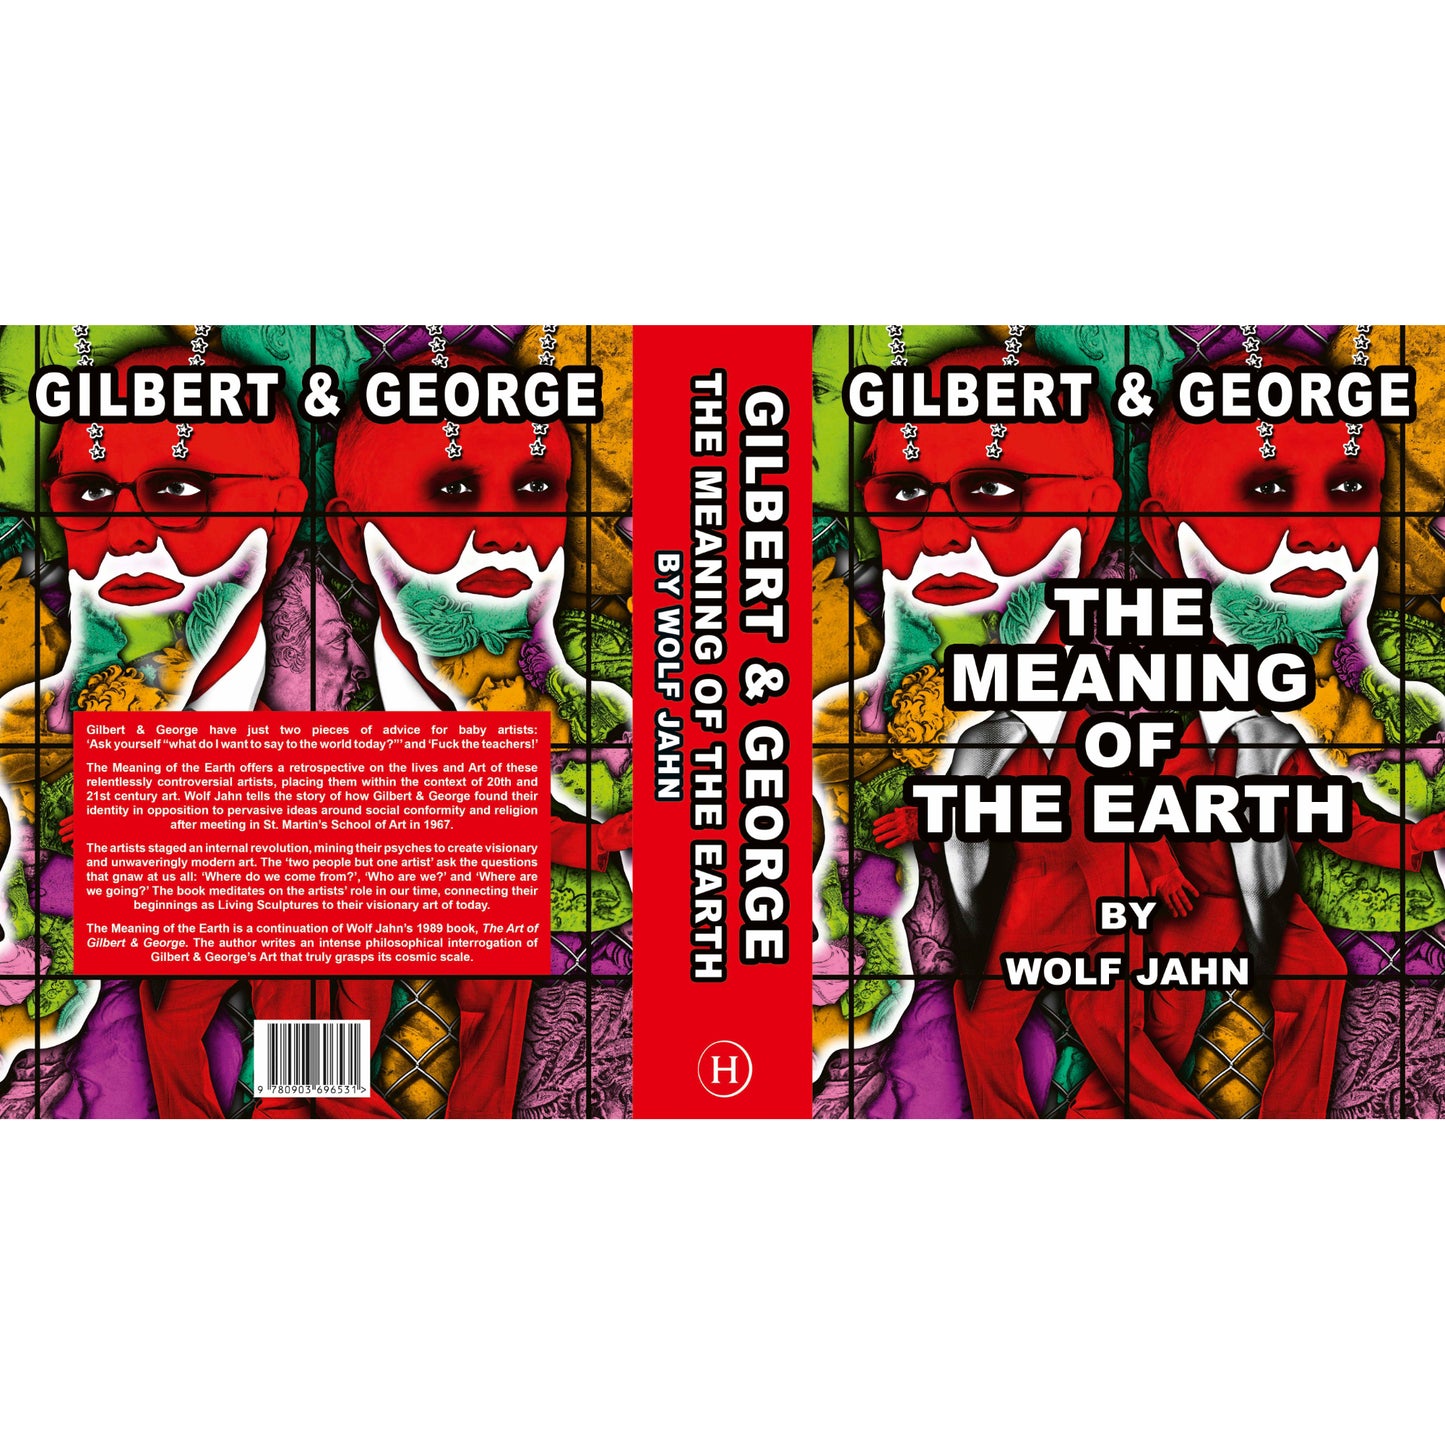 GILBERT AND GEORGE: THE MEANING OF THE EARTH by WOLF JAHN *HAND SIGNED*